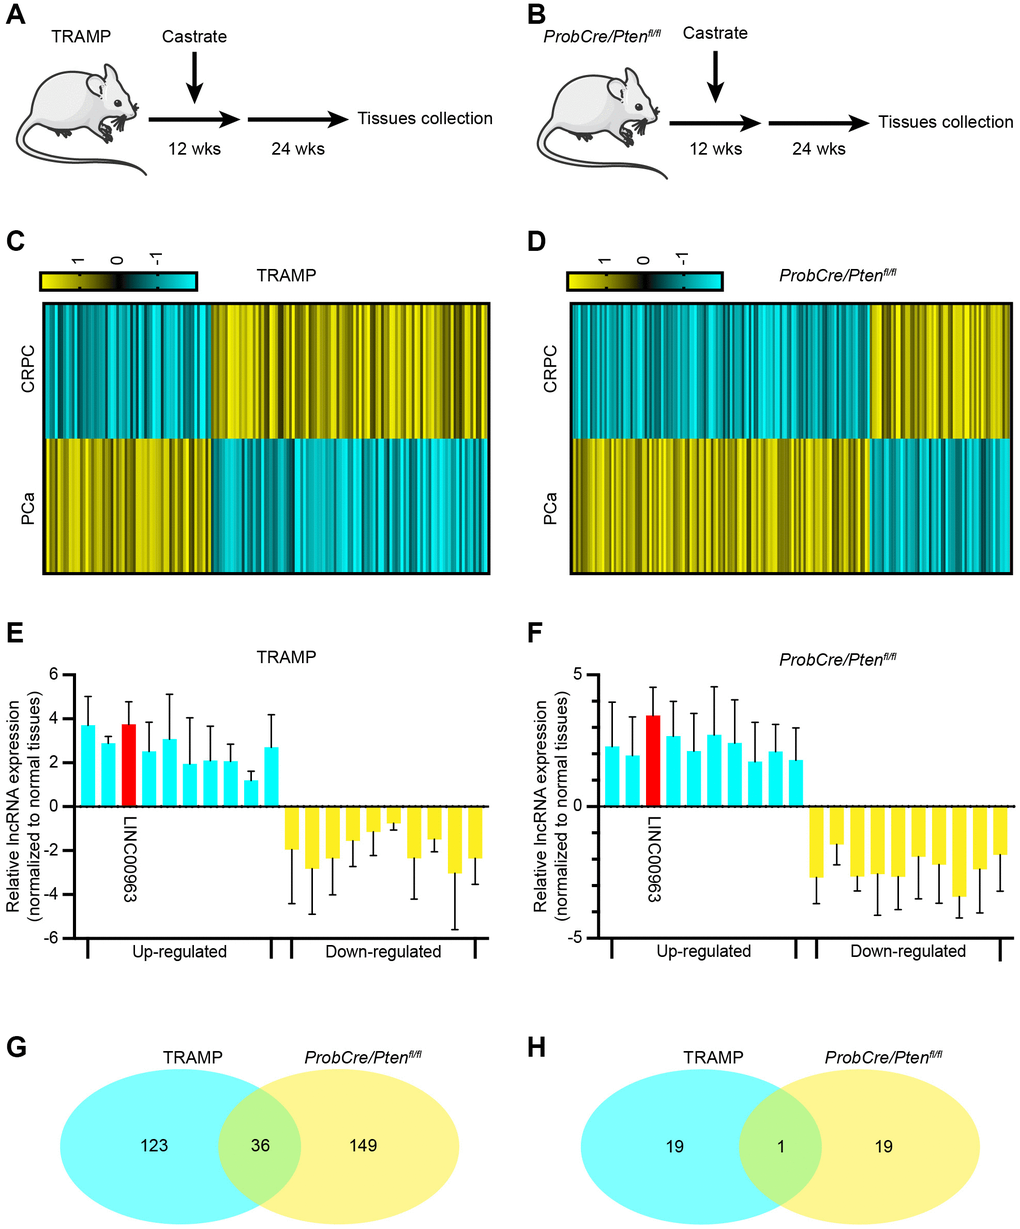 Long noncoding RNA LINC00963 is increased in castration-resistant prostate cancer (CRPC) tissues. (A, B) Experimental approach to construct CRPC mouse models; TRAMP mouse (A) and ProbCre/Ptenfl/fl mouse (B). (C, D) Heat map of differential expression of long noncoding RNAs (lncRNAs) in cells isolated from normal prostate cancer (PCa) and CRPC mouse models (C, TRAMP mouse; D, ProbCre/Ptenfl/fl mouse). (E, F) The expression of the 10 most apparent up- and decreased lncRNAs were analyzed by RT-qPCR in CRPC tissues and compared to those in normal PCa tissues (E, TRAMP mouse; F, ProbCre/Ptenfl/fl mouse). (G) Intersection of differentially expressed lncRNAs according to sequencing assays. (H) Intersection of differentially expressed lncRNAs according to RT-qPCR. Mean ± SEM.